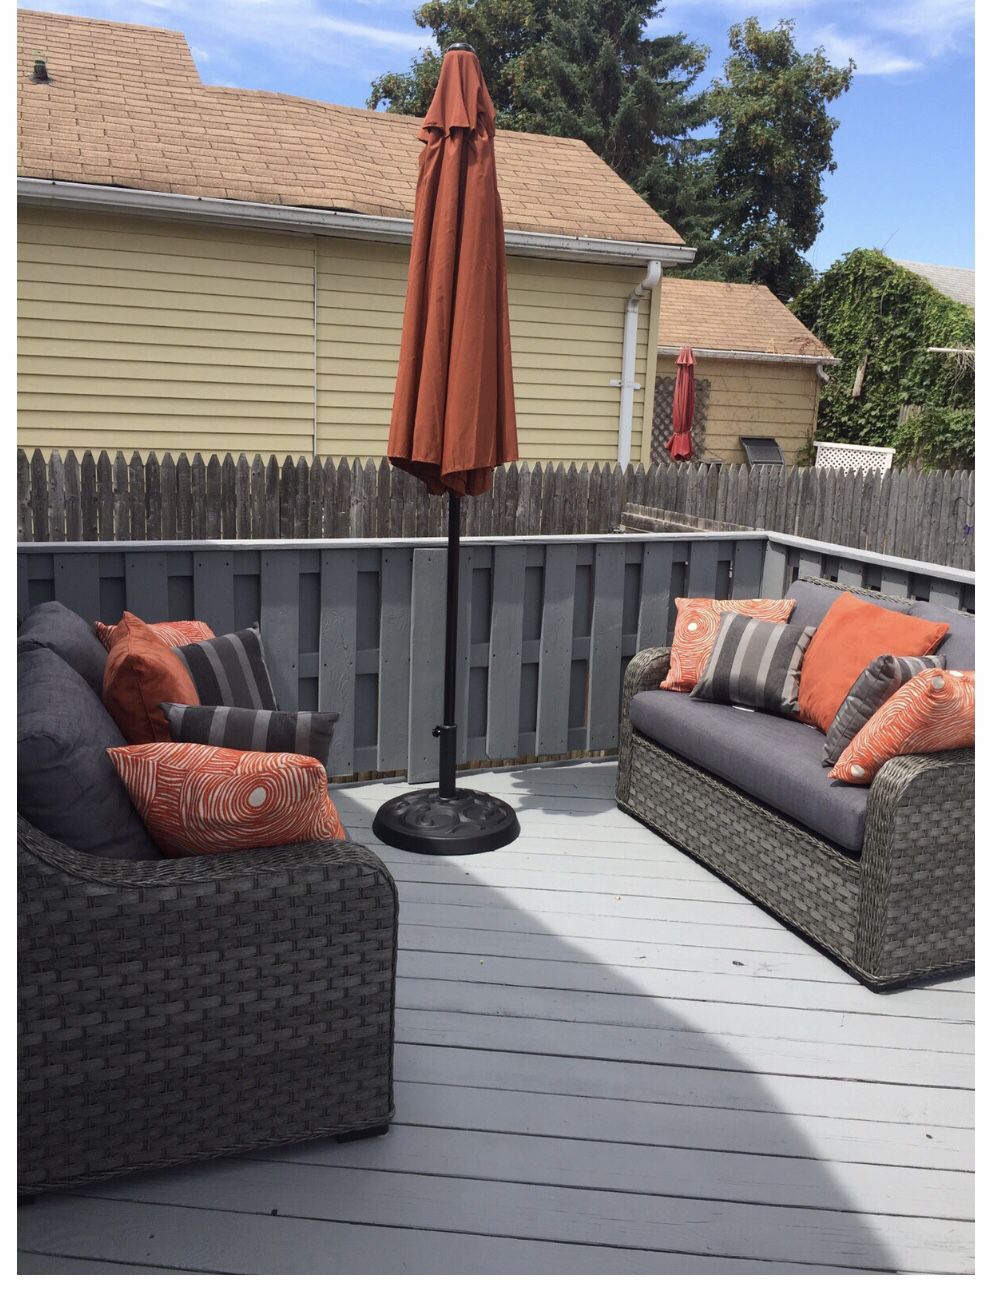 3 Piece Patio Furniture Set (1 small seat is missing from pic)